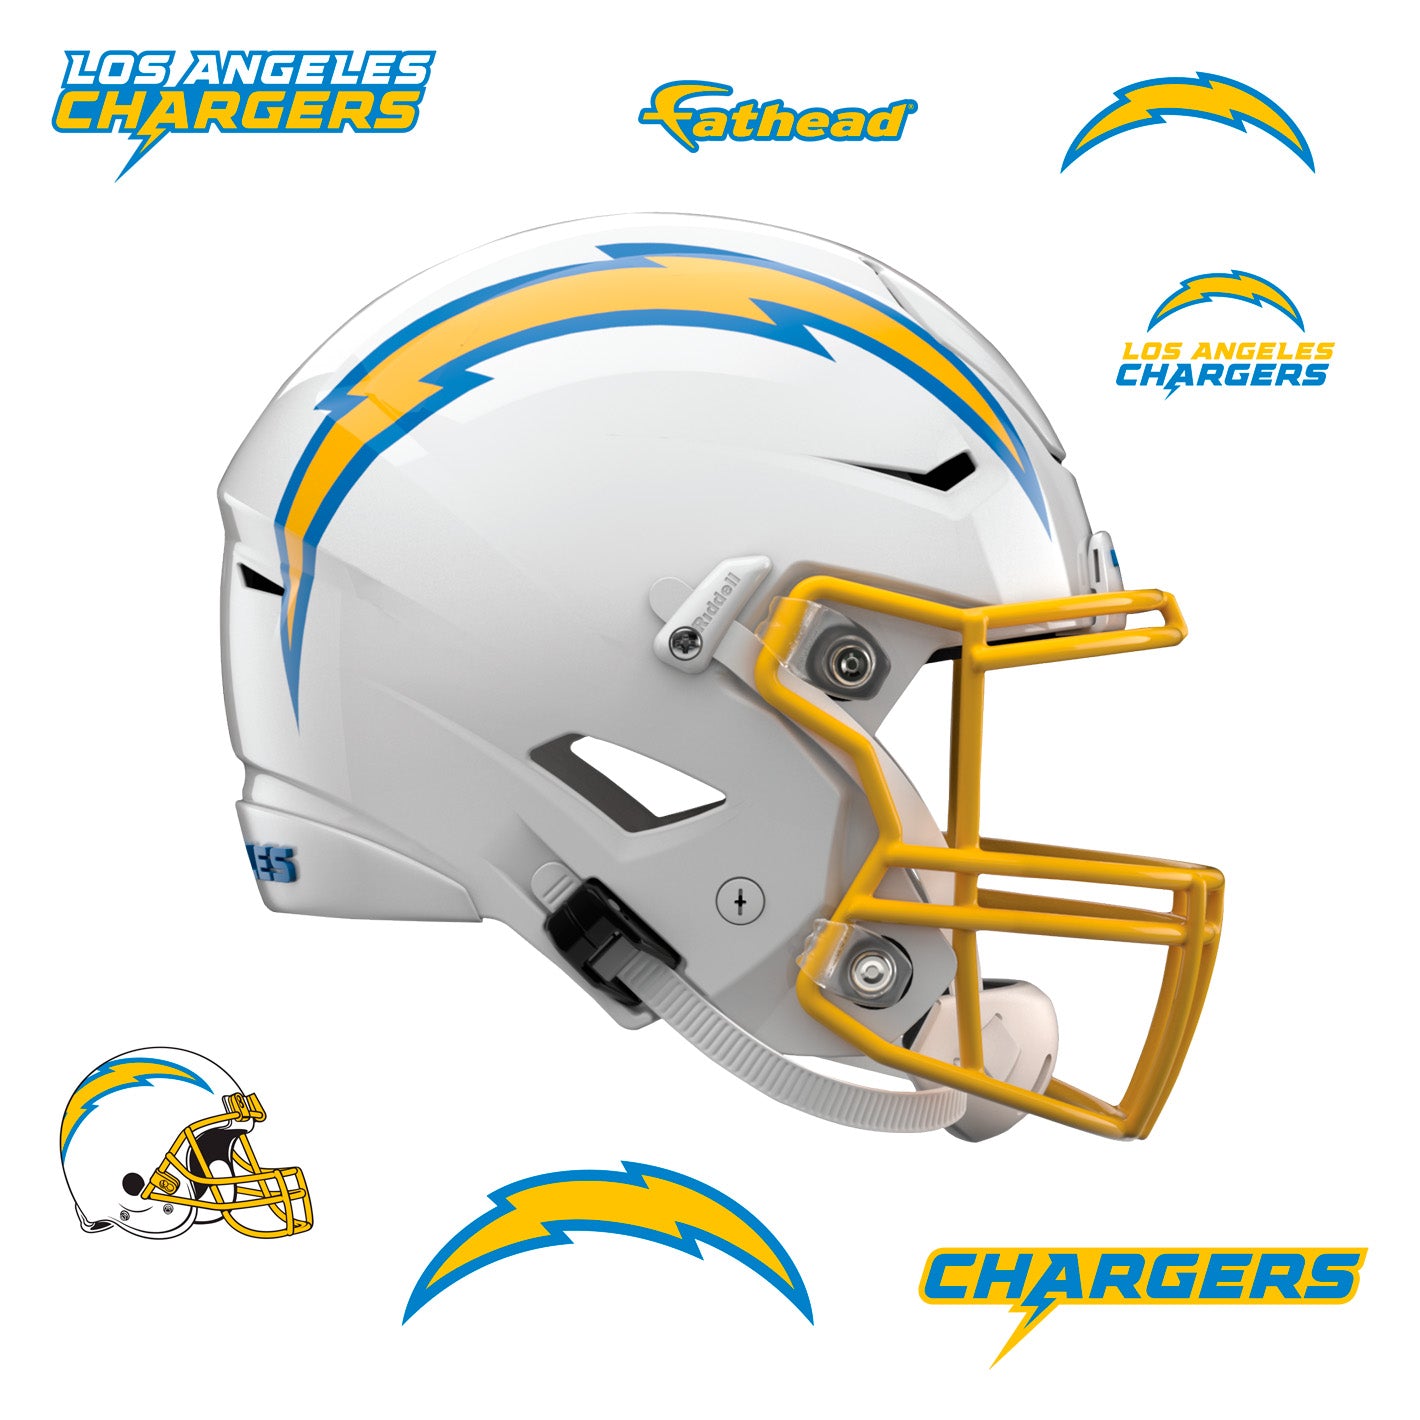 Los Angeles Chargers: 2022 Helmet - Officially Licensed NFL Removable  Adhesive Decal